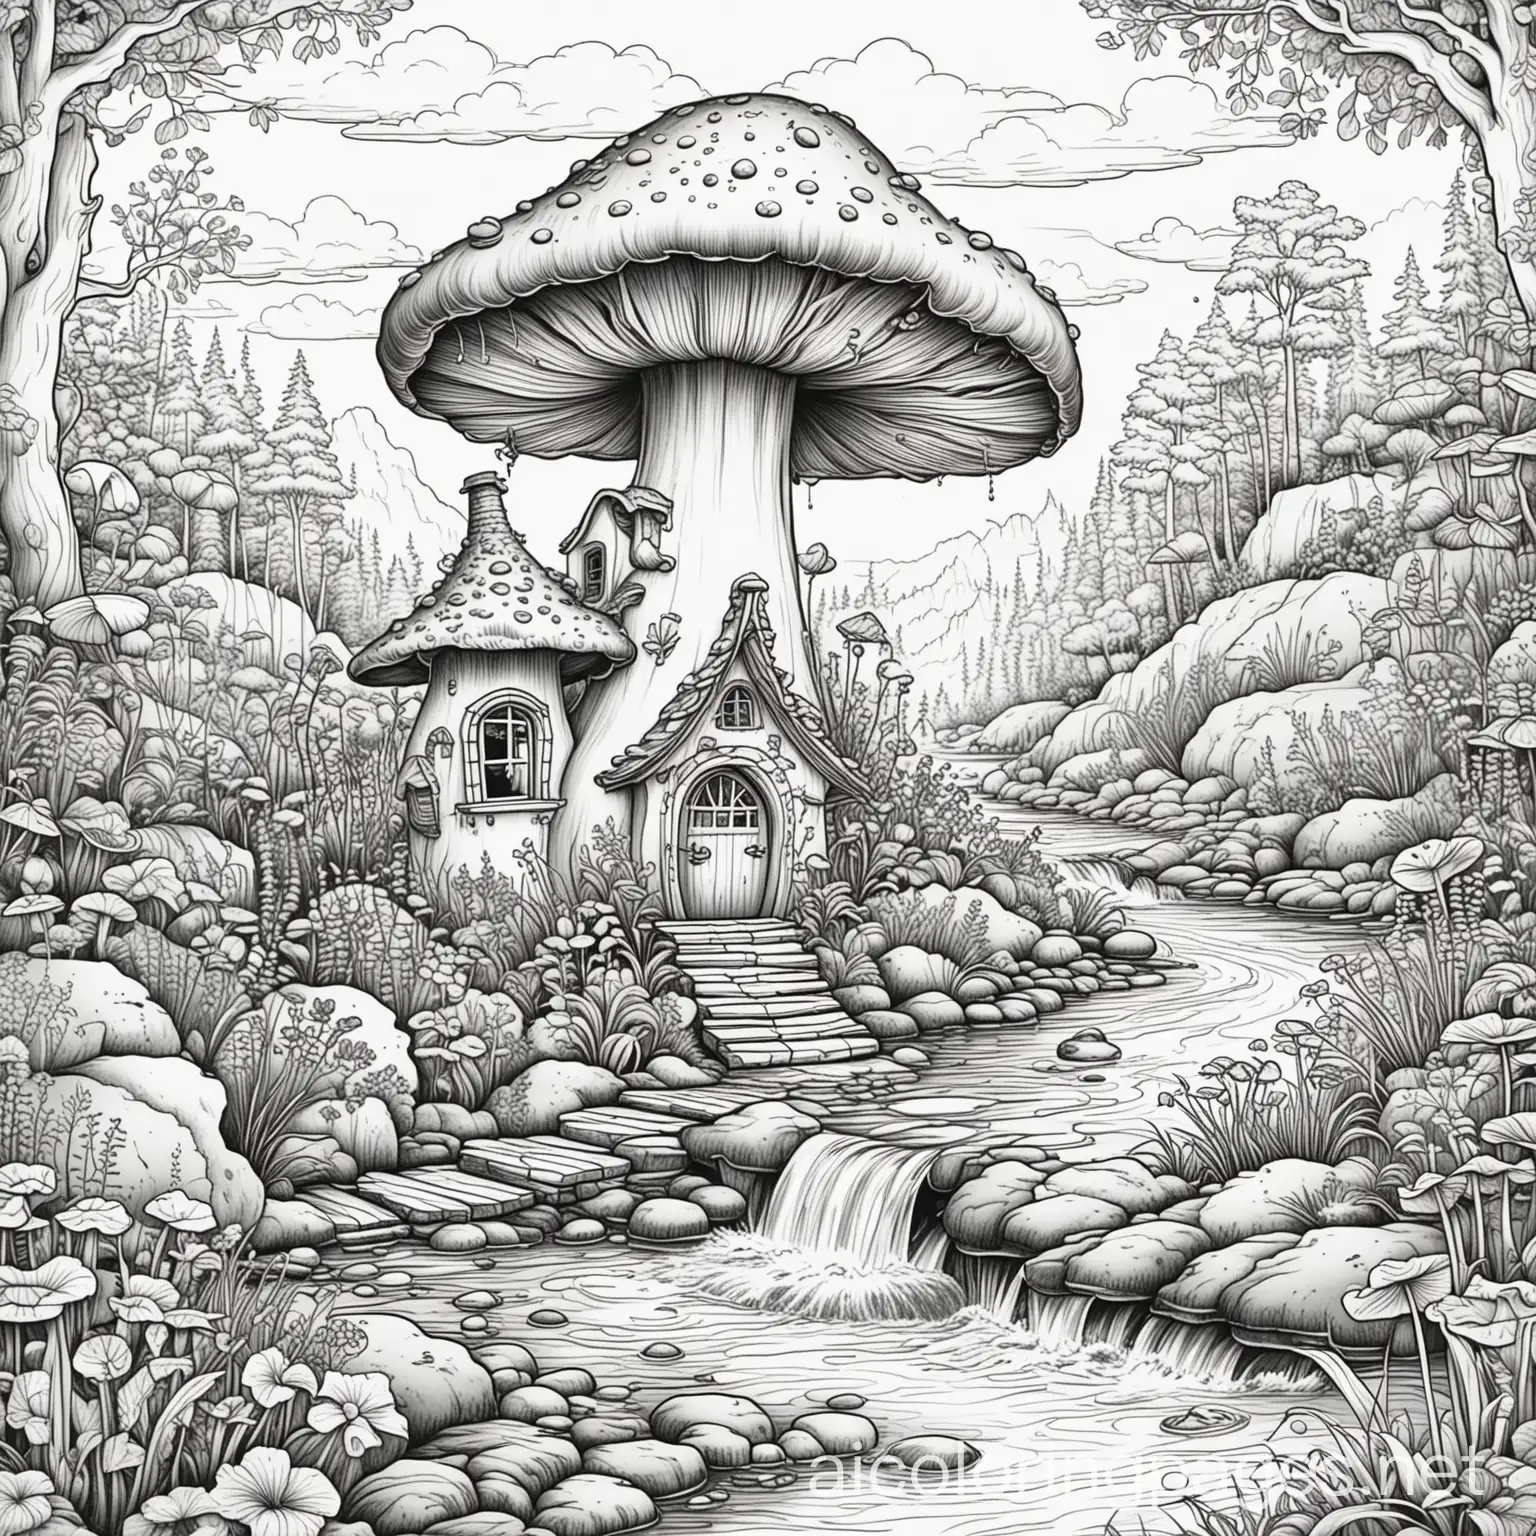 A SIMPLE COLORING BOOK PAGE OF A MUSHROOM HOUSE IN A FANTASY LANDSCAPE WITH A BROOK FLOWING BY IT, Coloring Page, black and white, line art, white background, Simplicity, Ample White Space